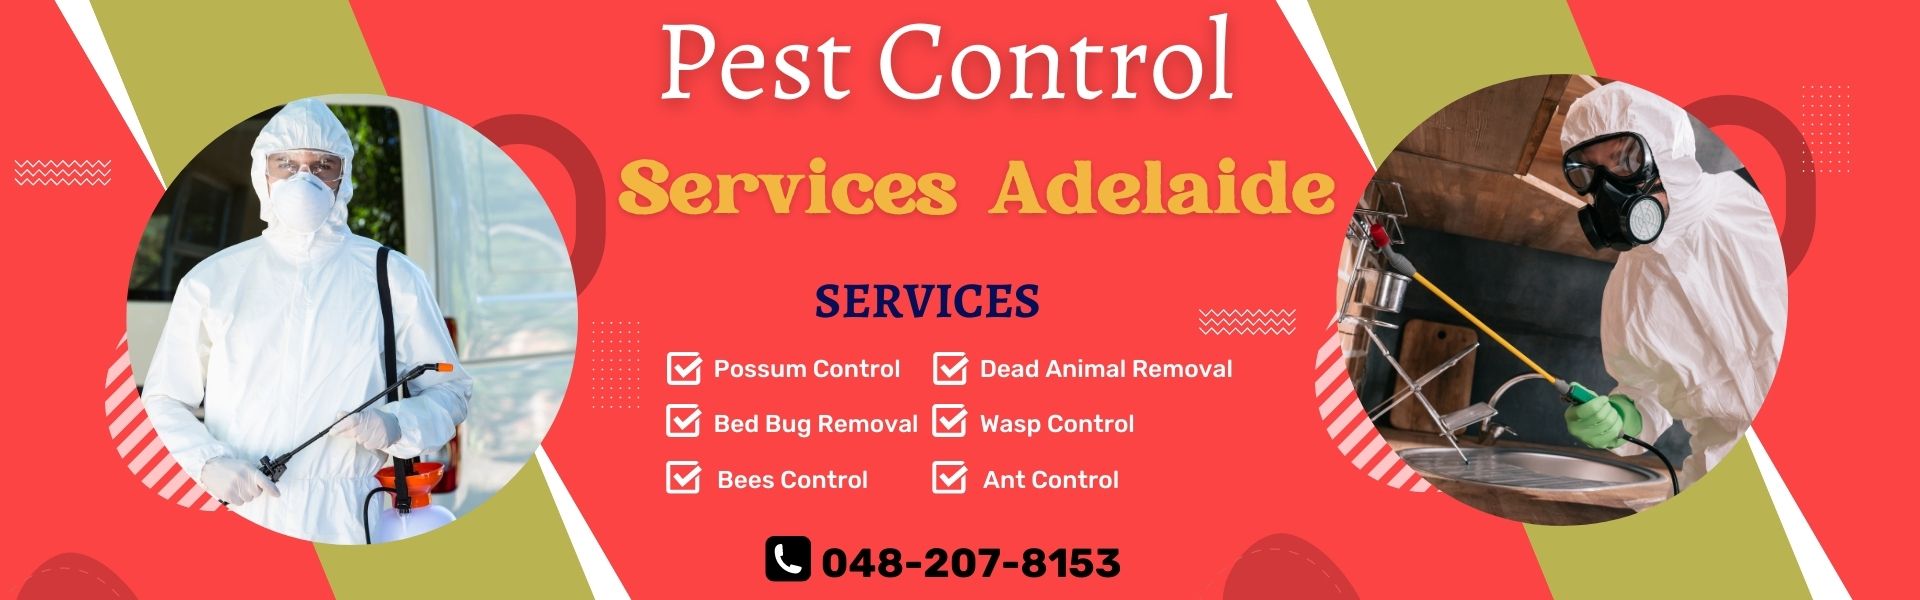 Pest Control Services Adelaide